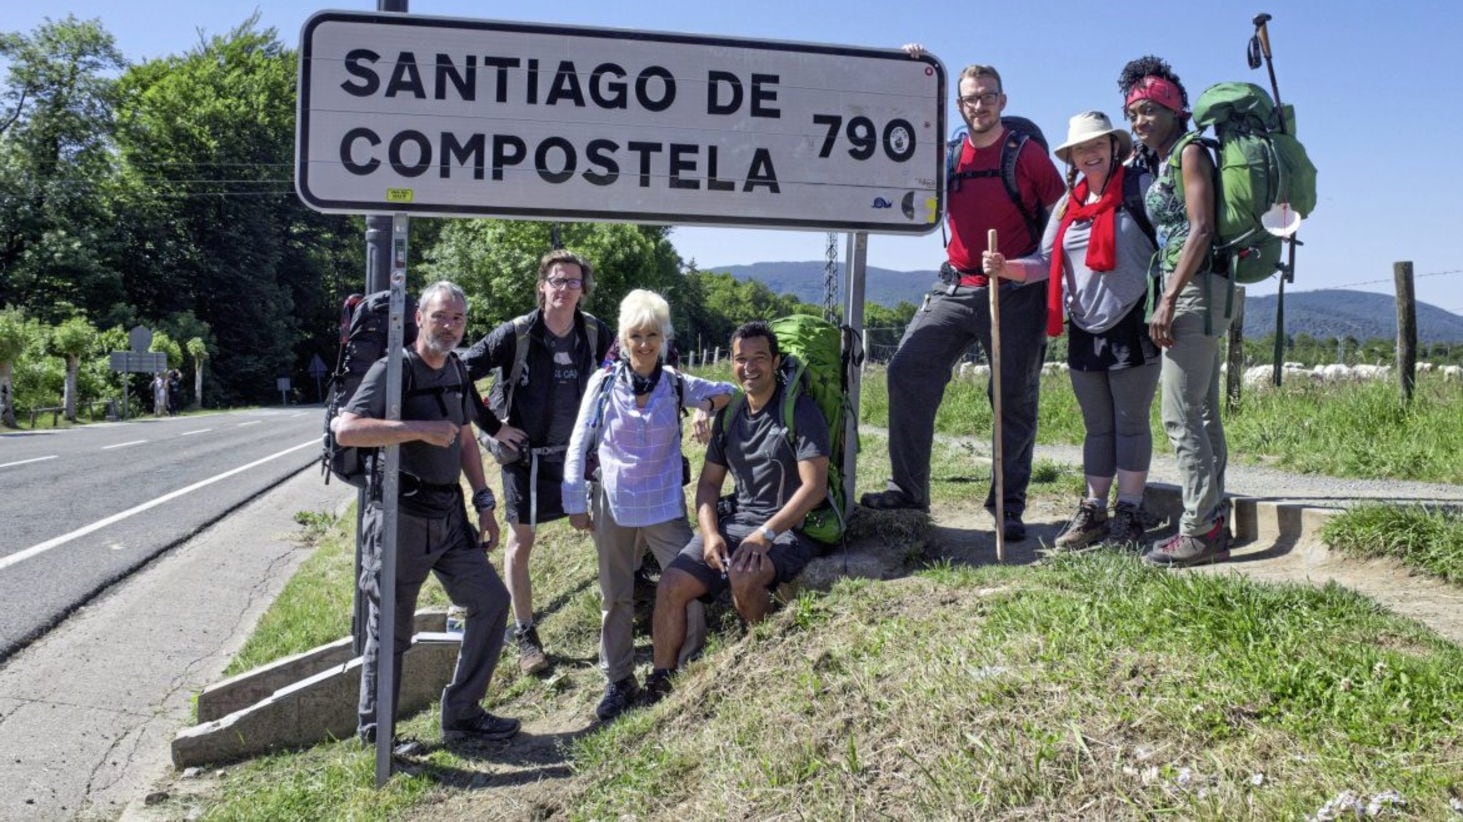 Neil Morrissey, Ed Byrne, Debbie McGee, Raphael Rowe, JJ Chalmers, the Rev Kate Bottley and Heather Small at the start of their journey on The Road to Santiago 